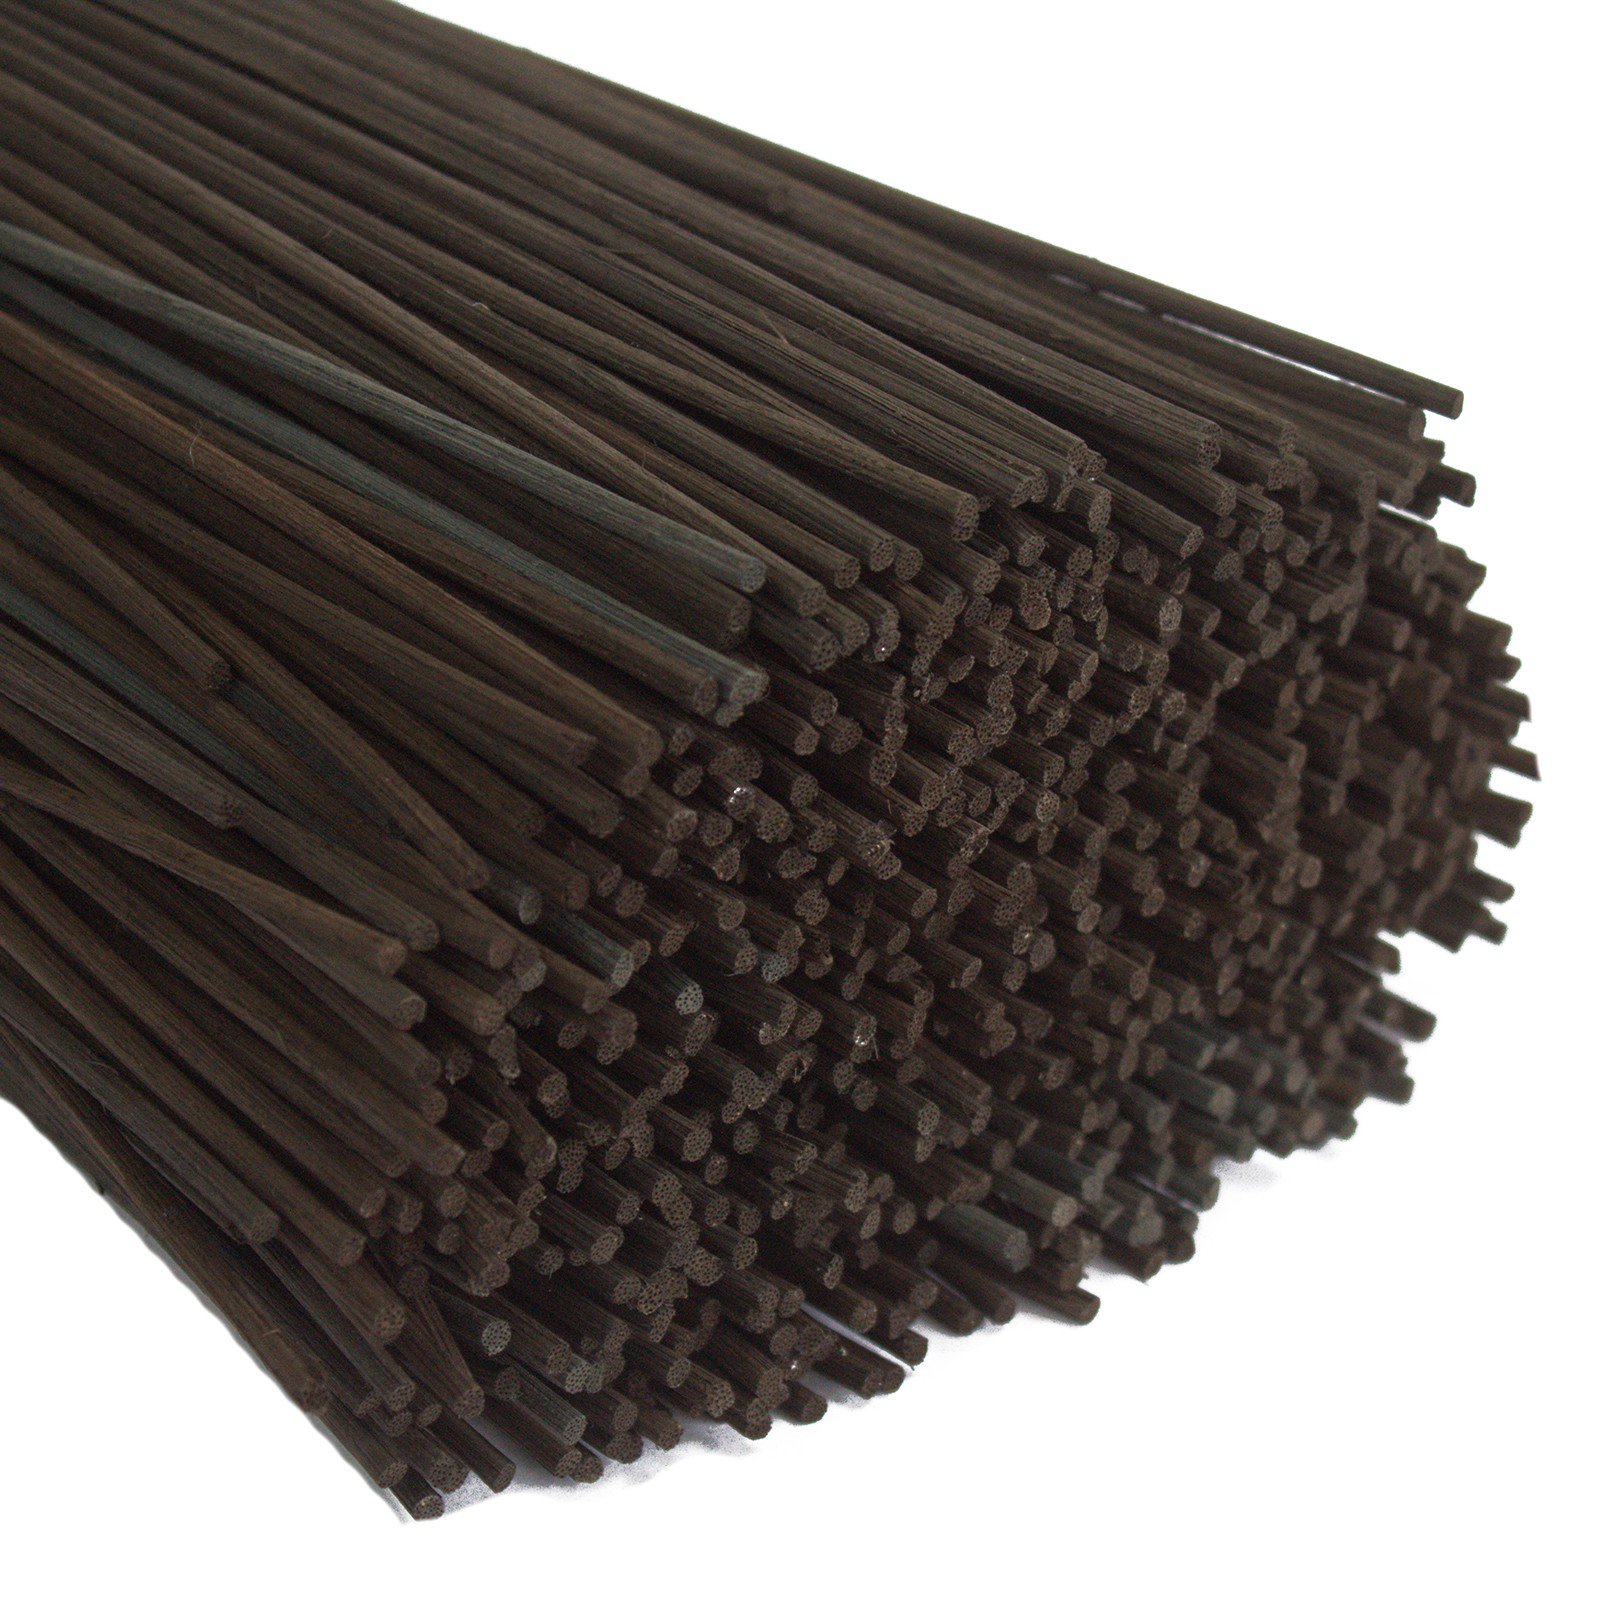 36 Pack of Black Reed Diffuser Sticks 3mm 